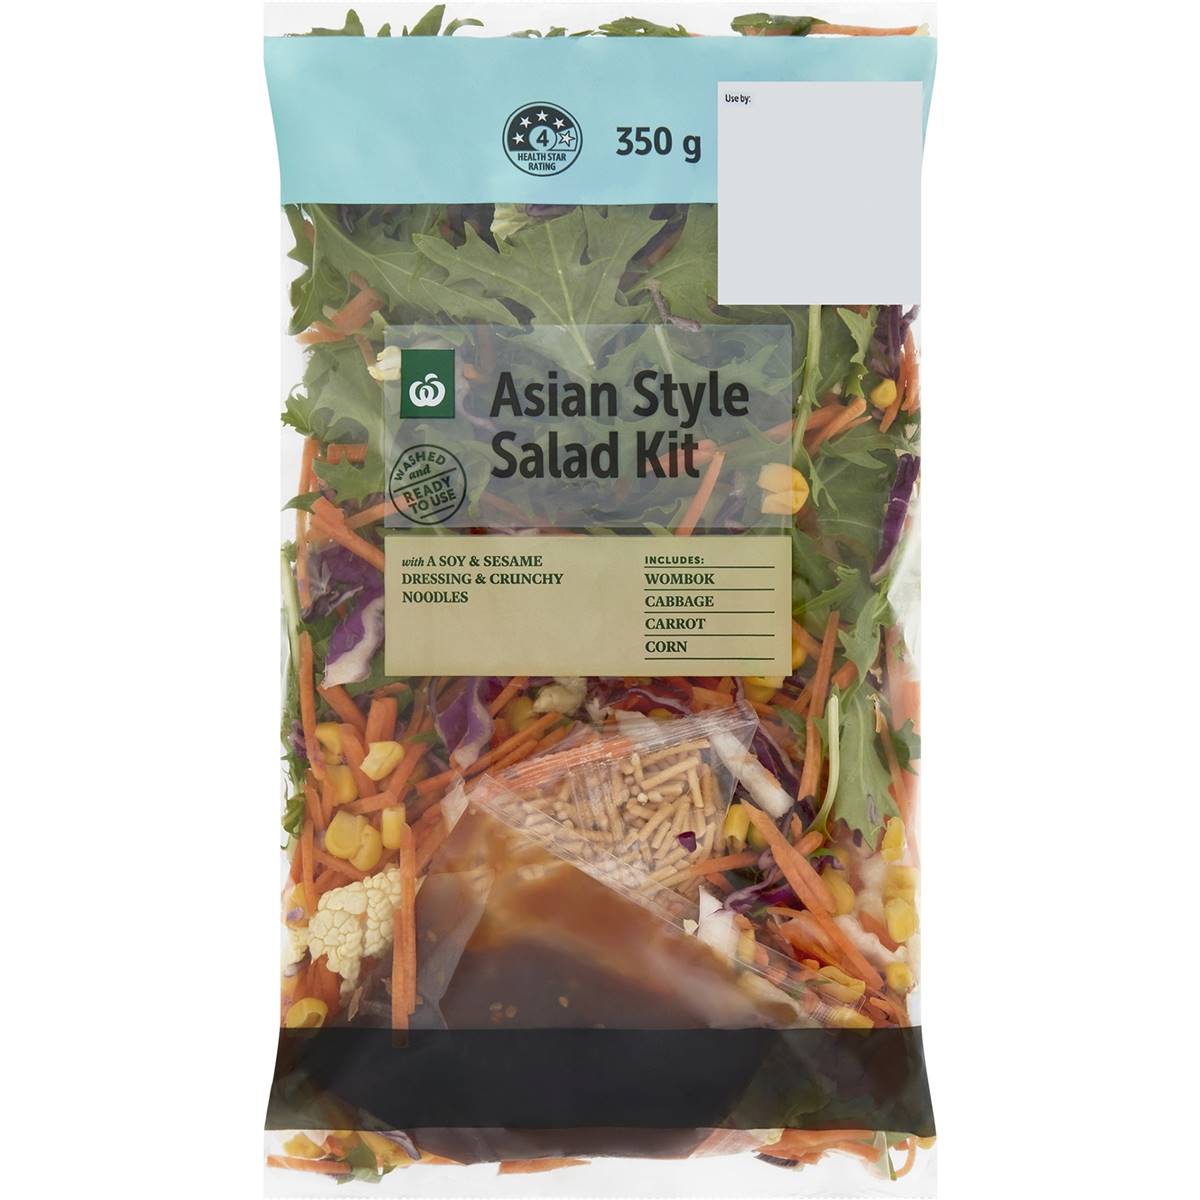 Calories in Woolworths Asian Style Salad Kit Salad Kit